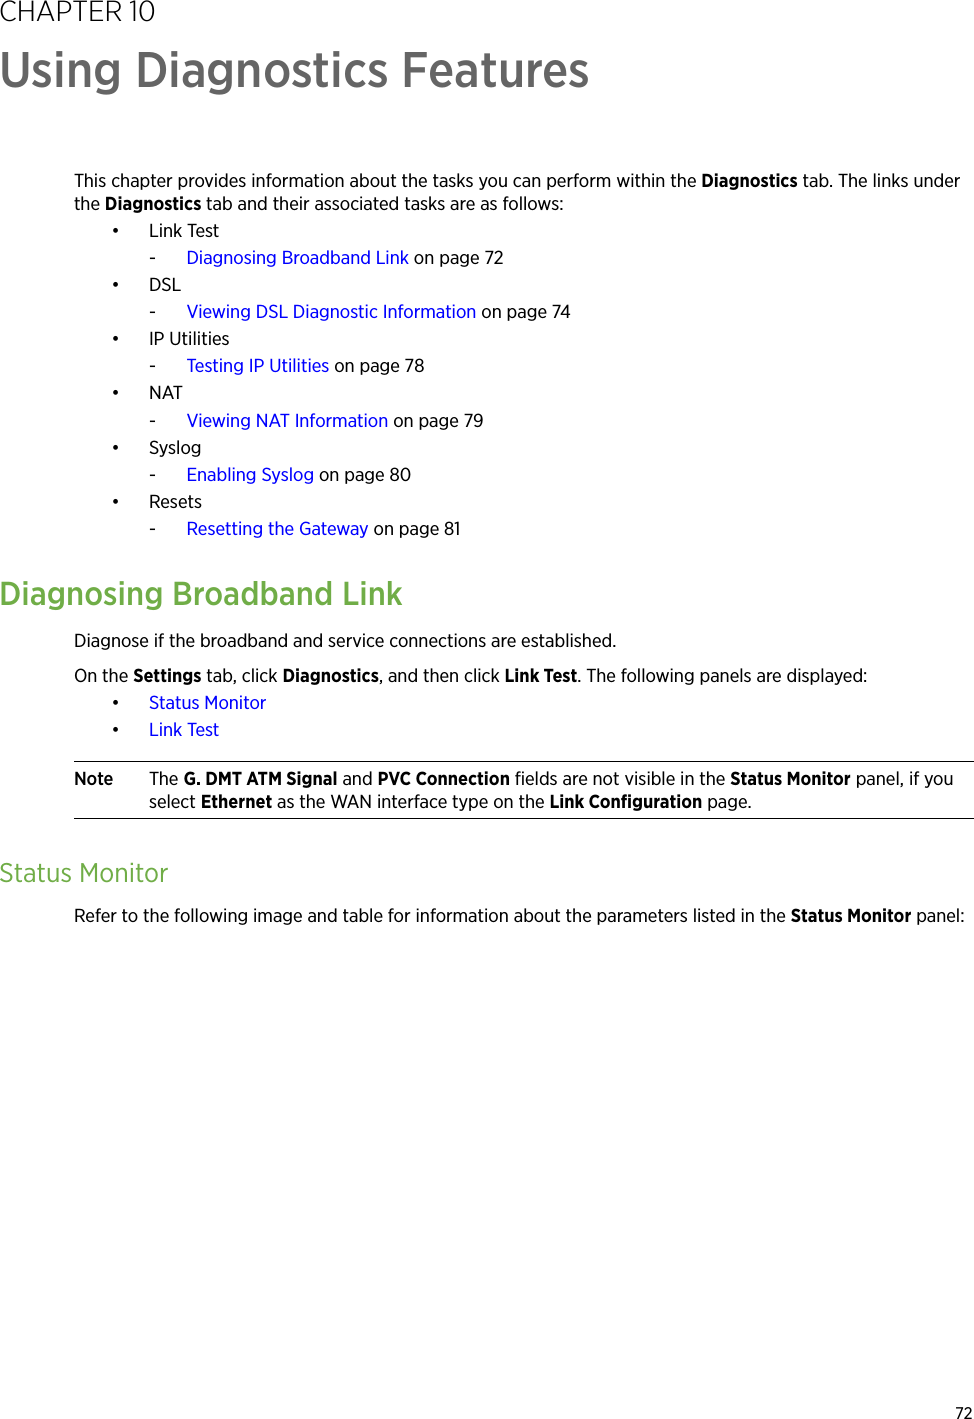 72CHAPTER 10Using Diagnostics FeaturesThis chapter provides information about the tasks you can perform within the Diagnostics tab. The links under the Diagnostics tab and their associated tasks are as follows:•Link Test-Diagnosing Broadband Link on page 72•DSL-Viewing DSL Diagnostic Information on page 74• IP Utilities-Testing IP Utilities on page 78•NAT-Viewing NAT Information on page 79•Syslog-Enabling Syslog on page 80• Resets-Resetting the Gateway on page 81Diagnosing Broadband LinkDiagnose if the broadband and service connections are established.On the Settings tab, click Diagnostics, and then click Link Test. The following panels are displayed:•Status Monitor•Link TestNote The G. DMT ATM Signal and PVC Connection fields are not visible in the Status Monitor panel, if you select Ethernet as the WAN interface type on the Link Configuration page.Status MonitorRefer to the following image and table for information about the parameters listed in the Status Monitor panel: